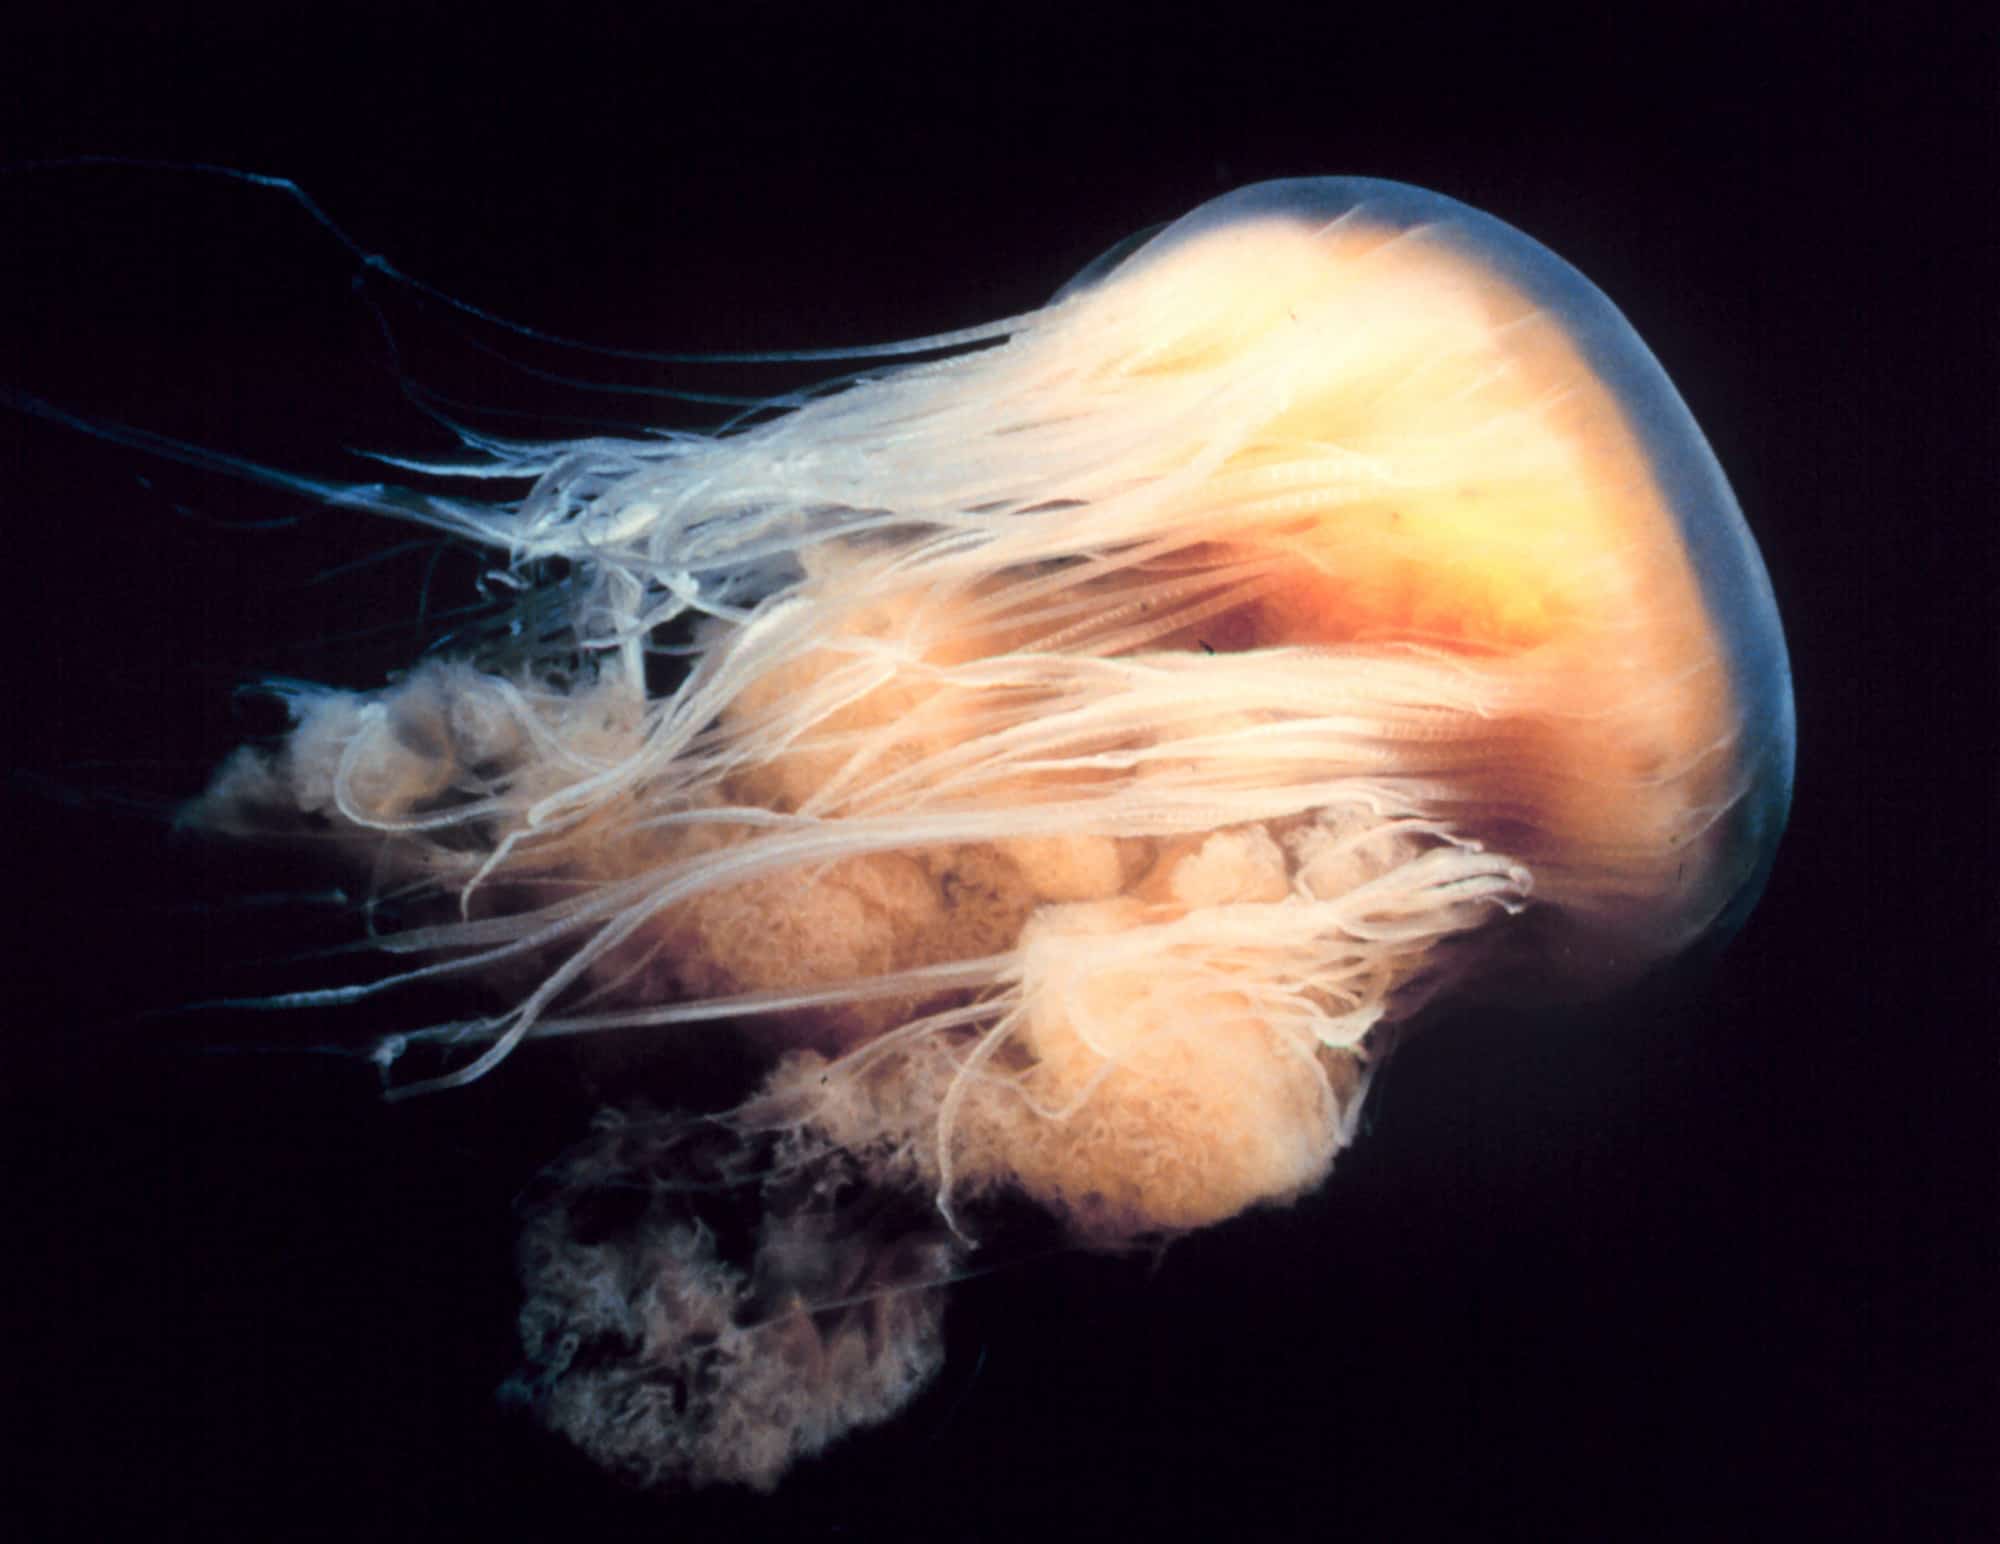 A jellyfish swimming. Jellyfish have shut power plants from Sweden to the United States while killing thousands of farmed fish in pens held off the coast of Britain. Climate change may be one reason more jellyfish are congregating in large numbers known as blooms.